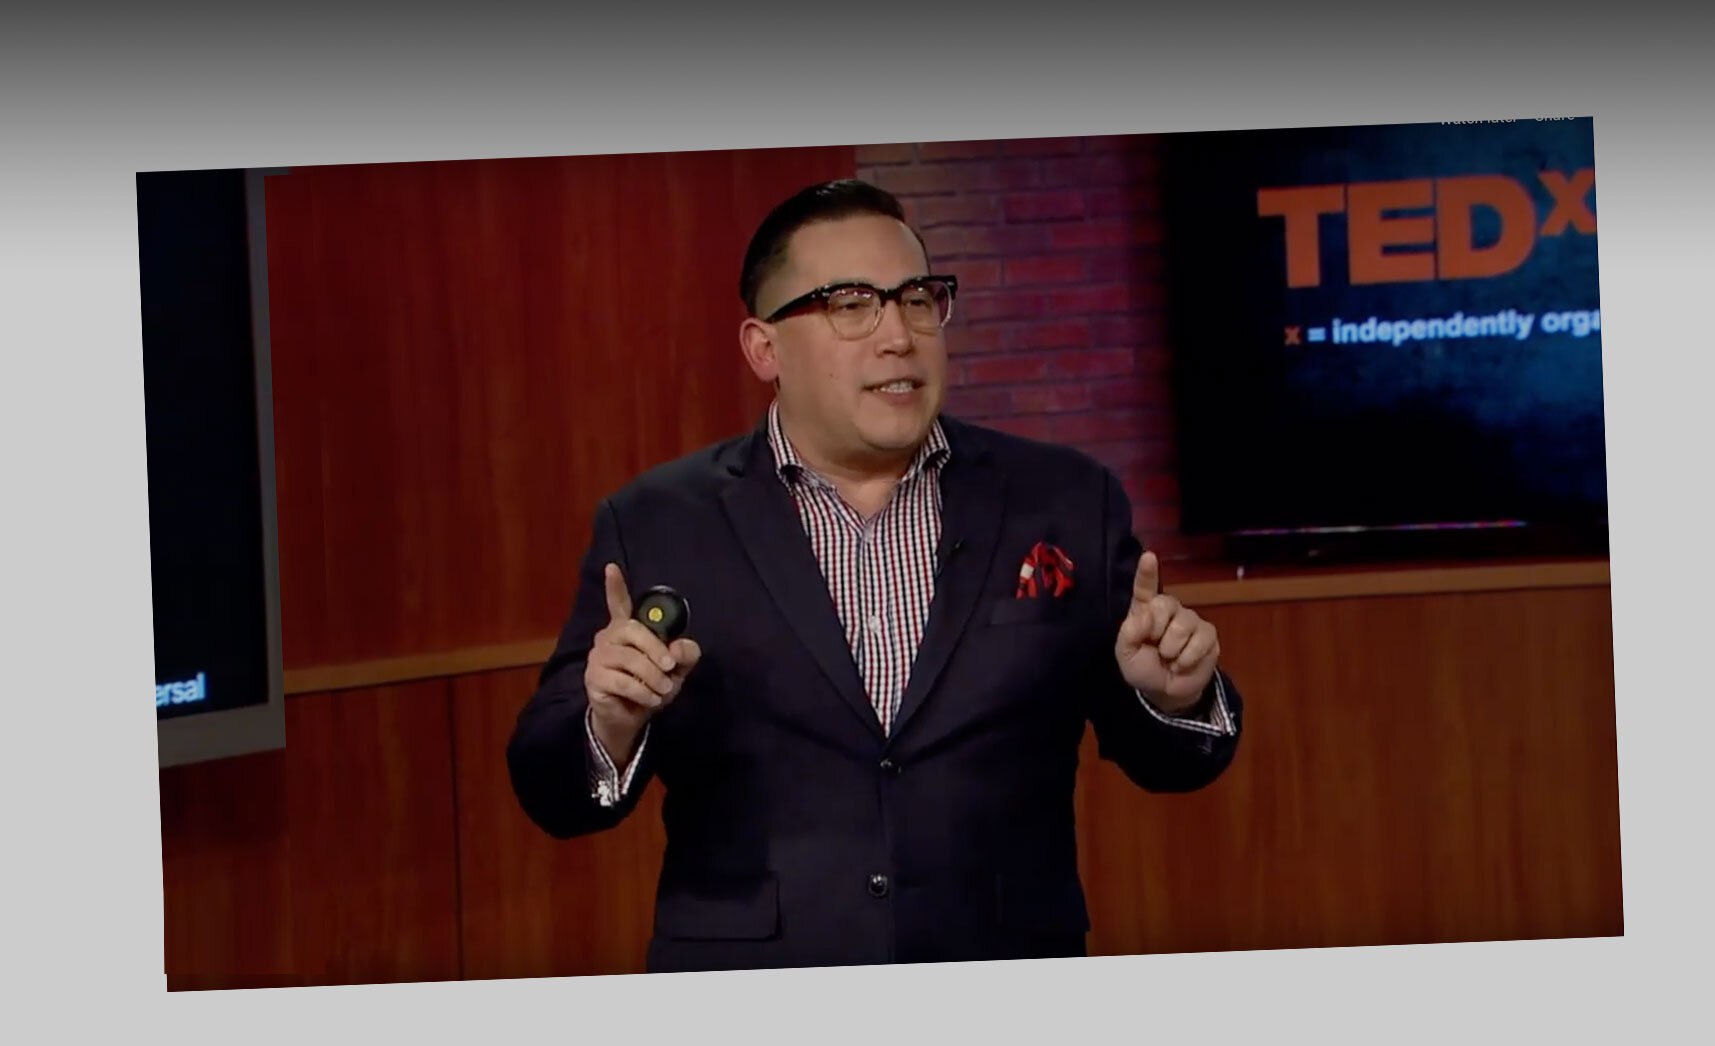  Watch the TEDx Talk Are You Coffee or Are You Starbucks!   LEARN MORE  